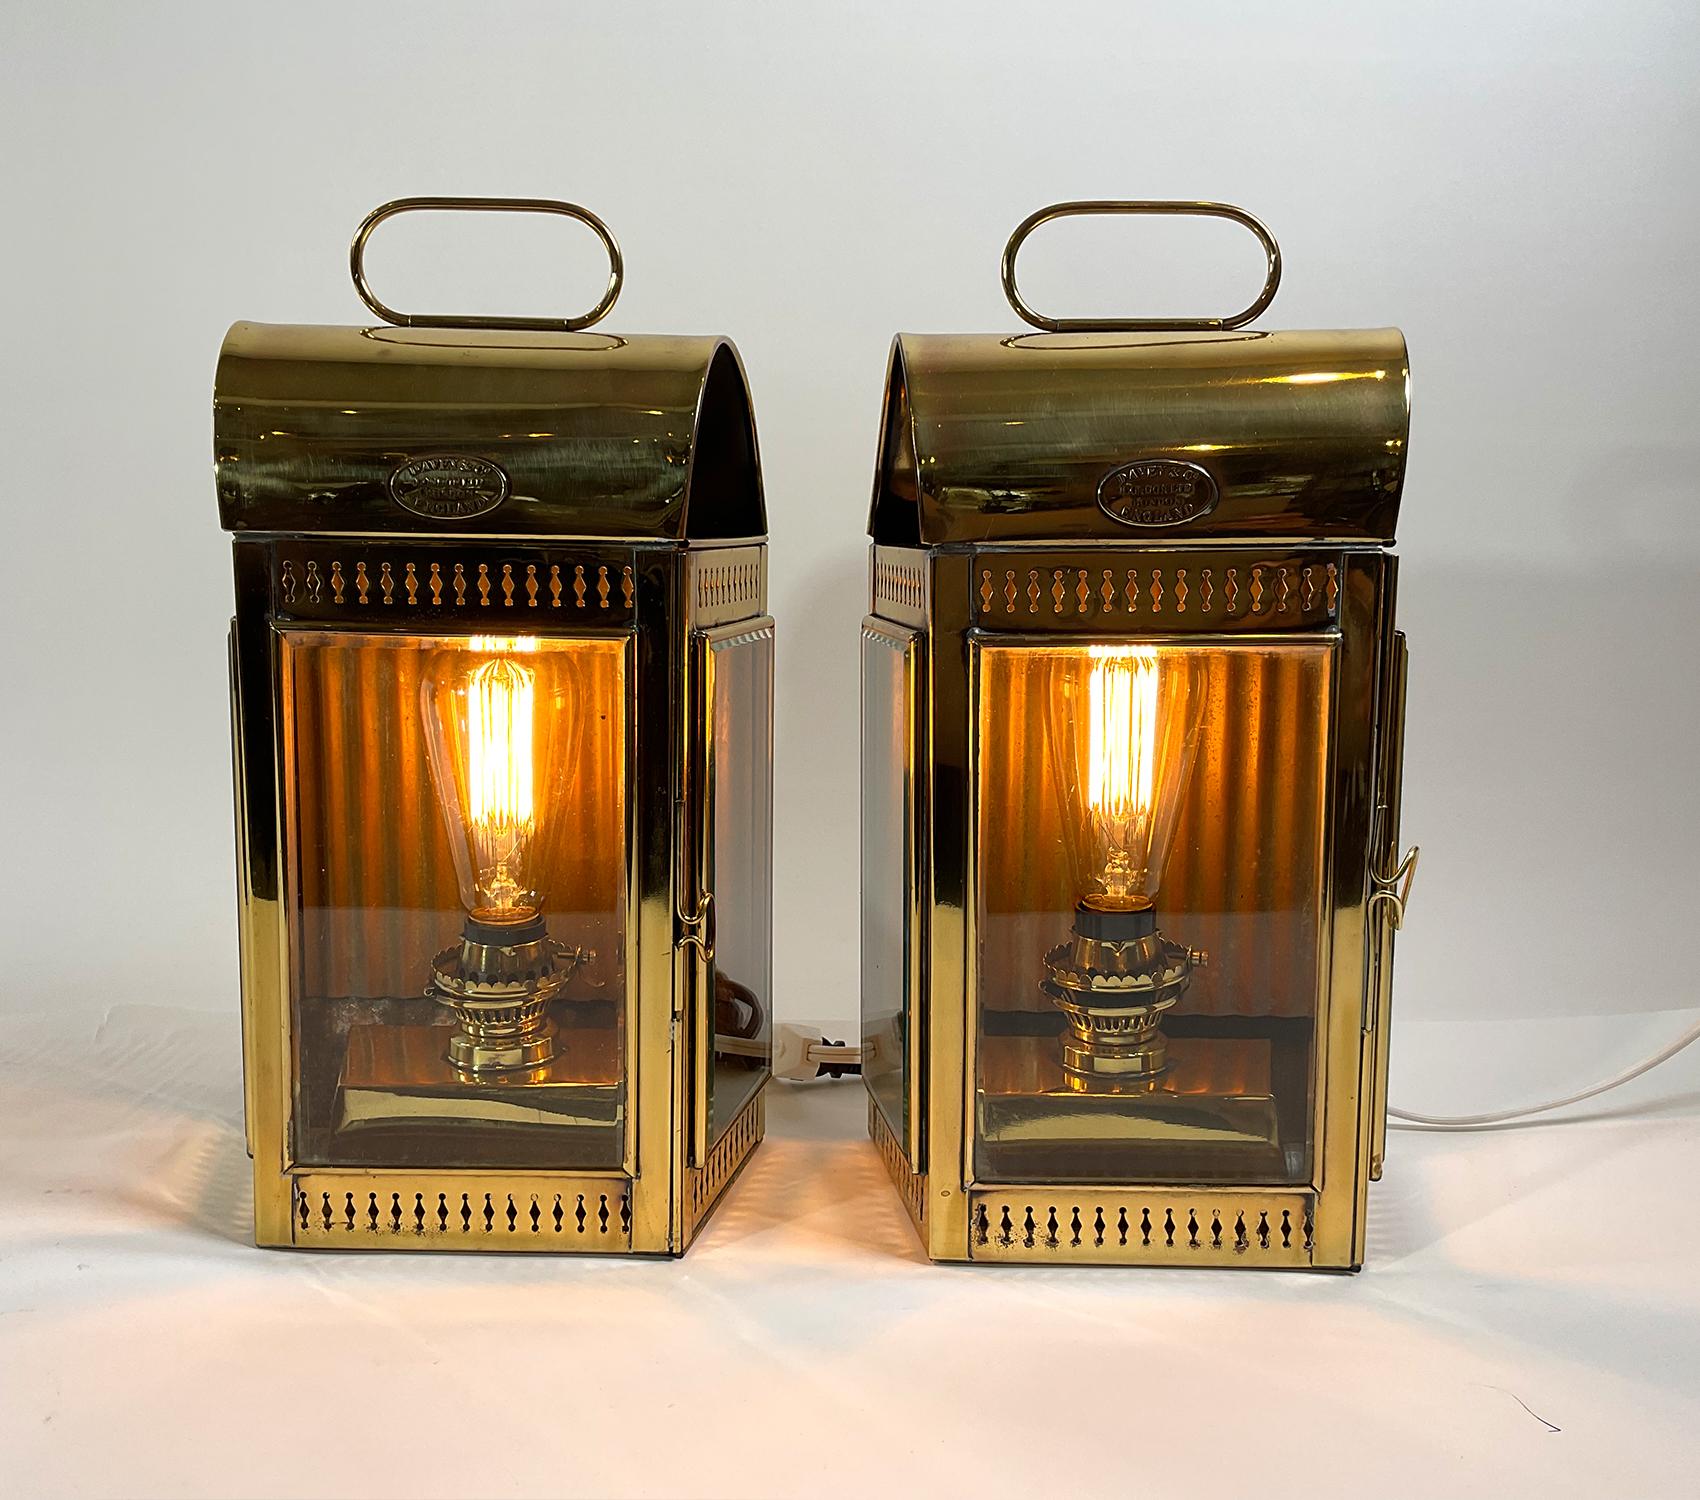 Pair of solid brass yacht cabin lanterns by the venerable English maker Davey and Company of London. With brass makers badges. Beveled glass panes, two hinged doors. The burners have been retrofitted with electric sockets for home use. Polished and